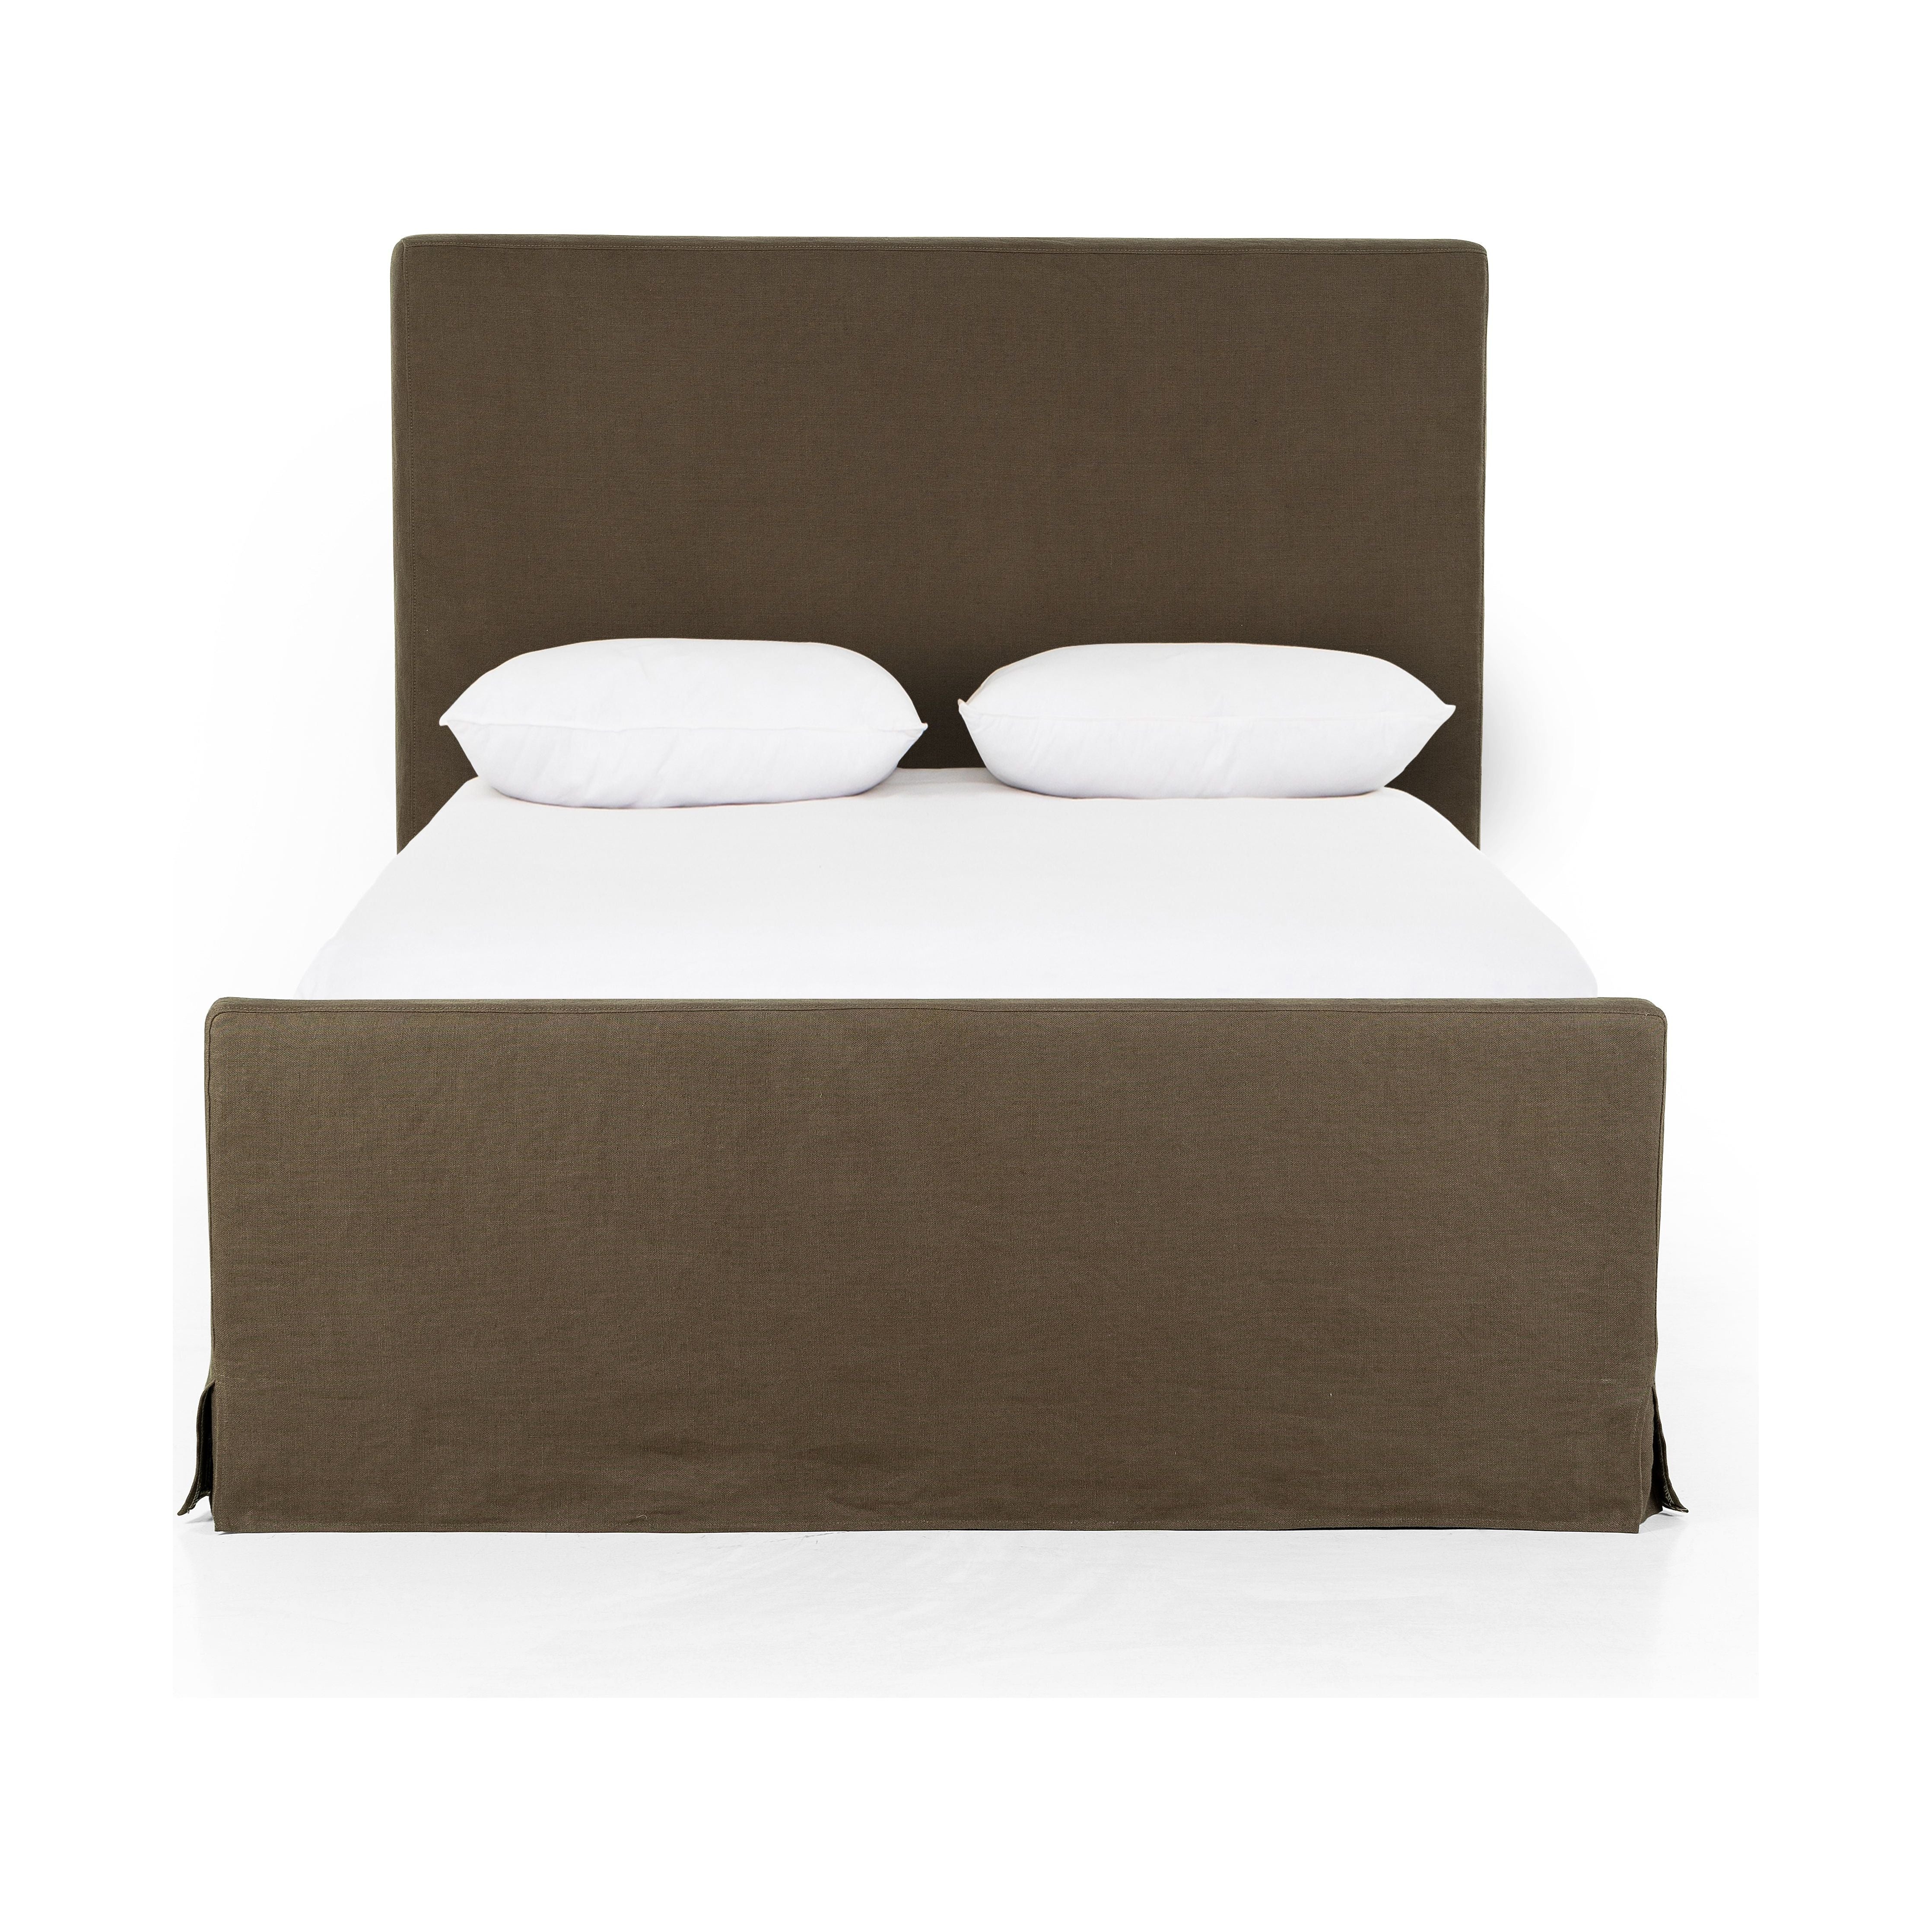 Daphne Coffee Slipcover Bed